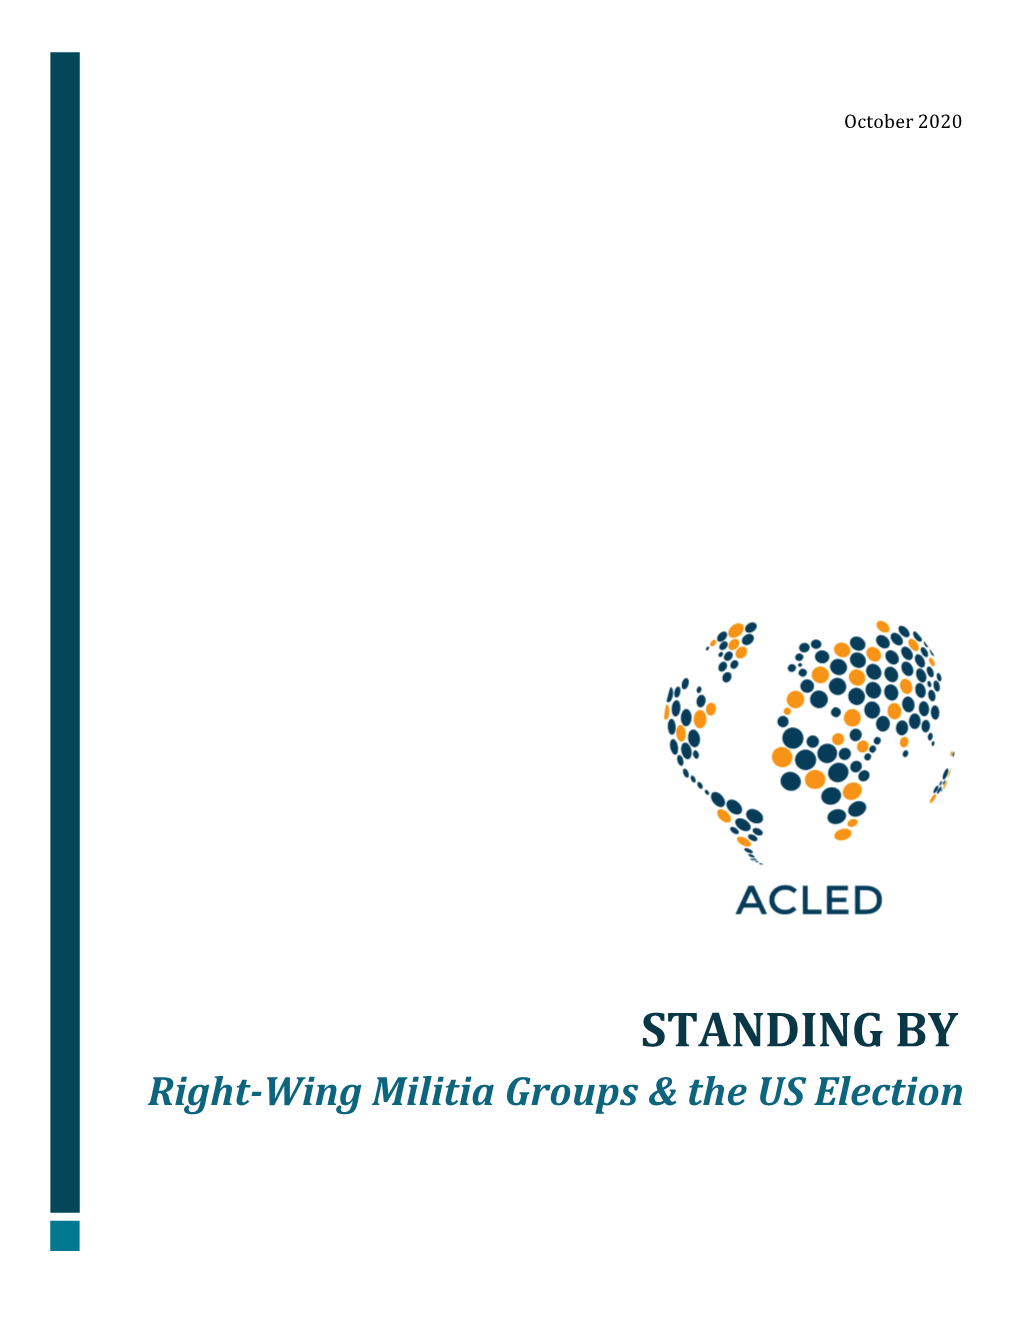 STANDING by Right-Wing Militia Groups & the US Election Executive Summary